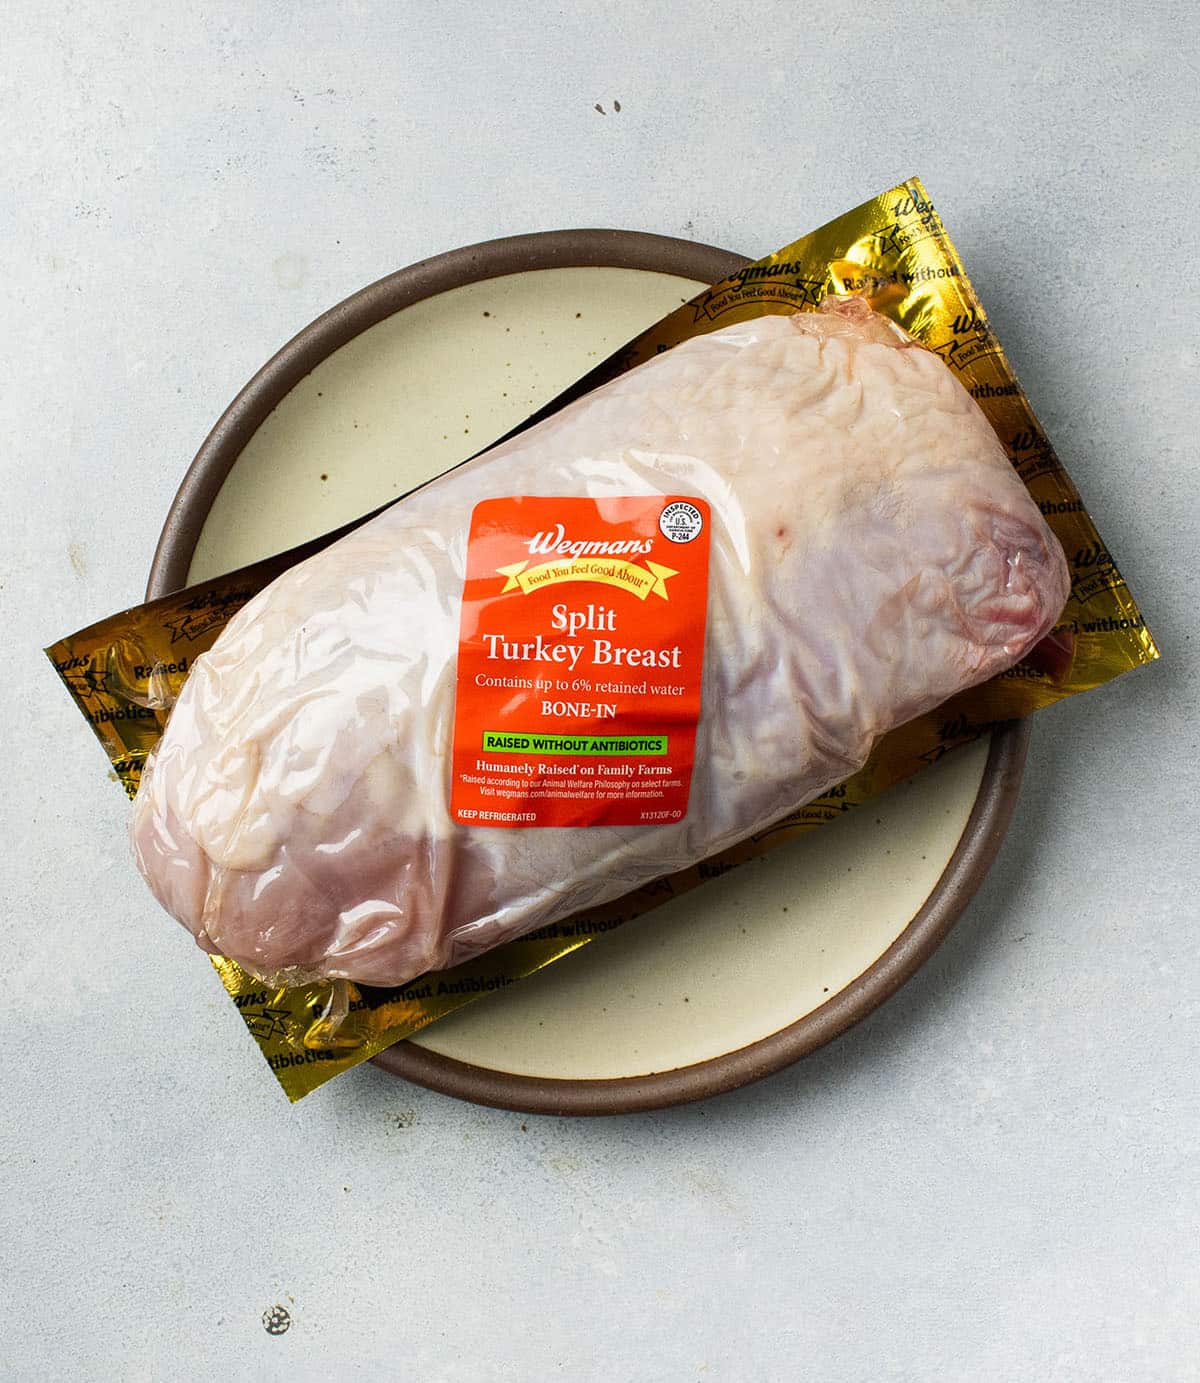 Split turkey breast in its packaging on a white table.